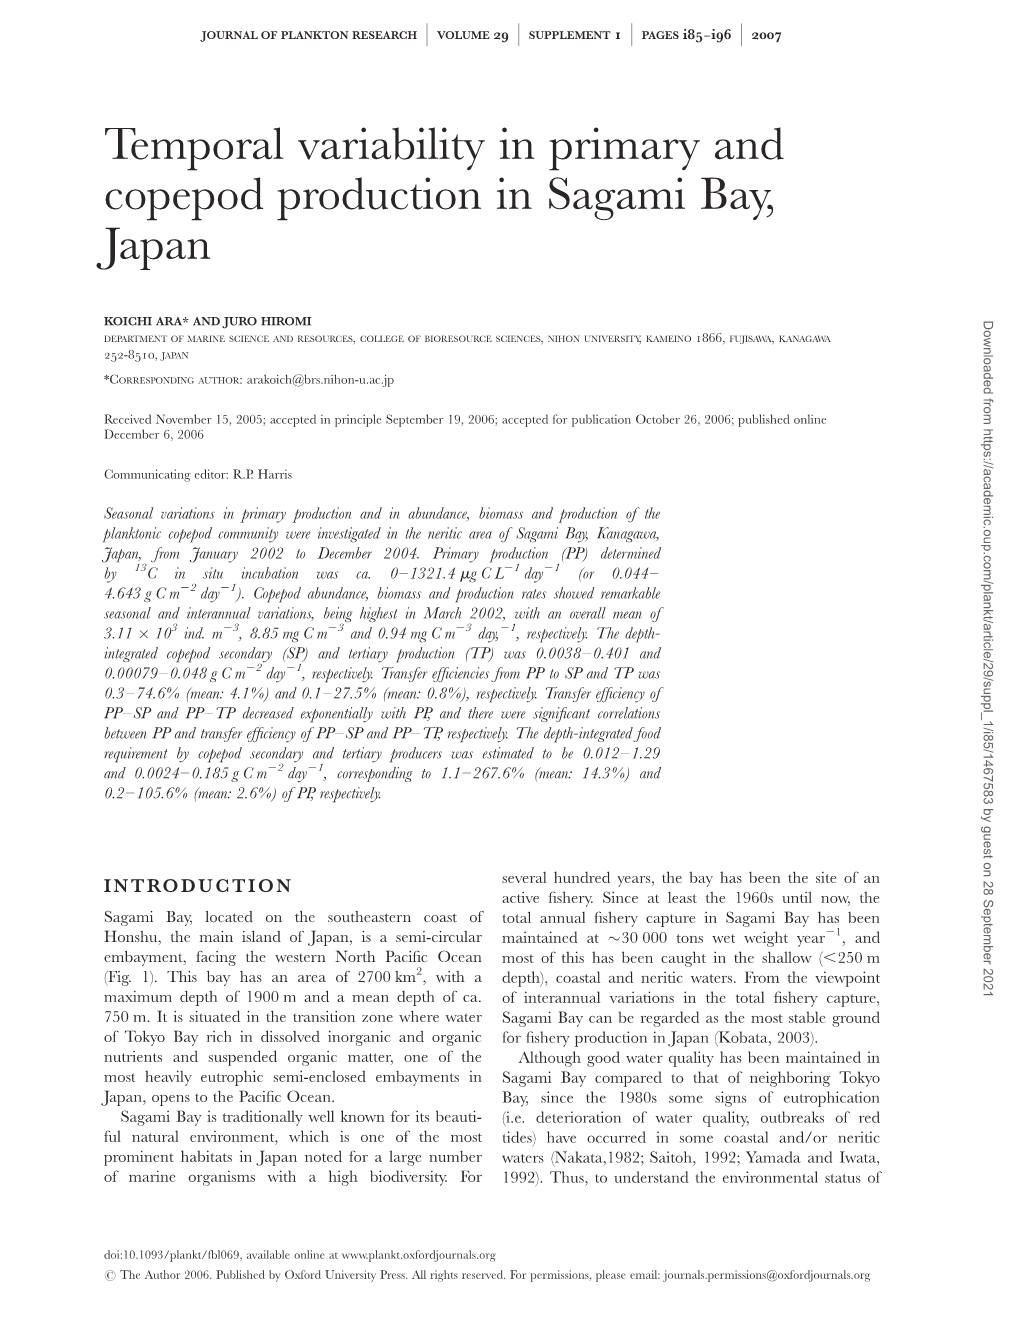 Temporal Variability in Primary and Copepod Production in Sagami Bay, Japan